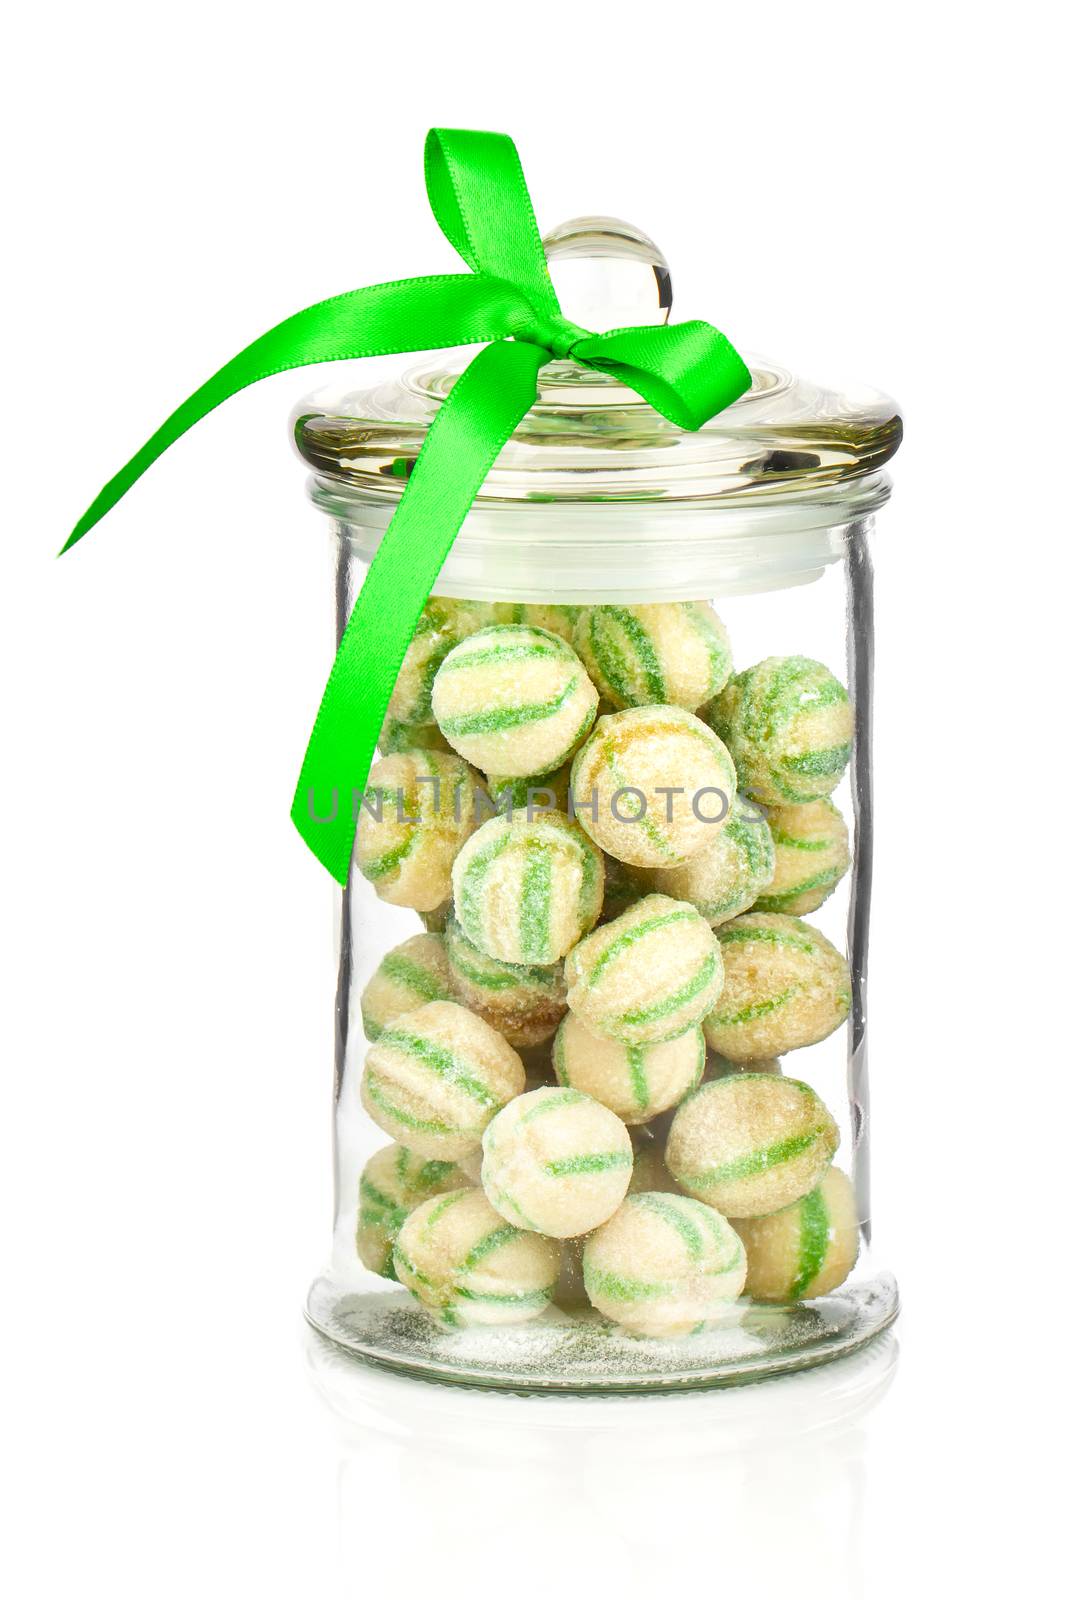 Photograph of a beautiful jar full of colorful candies, on a whi by motorolka